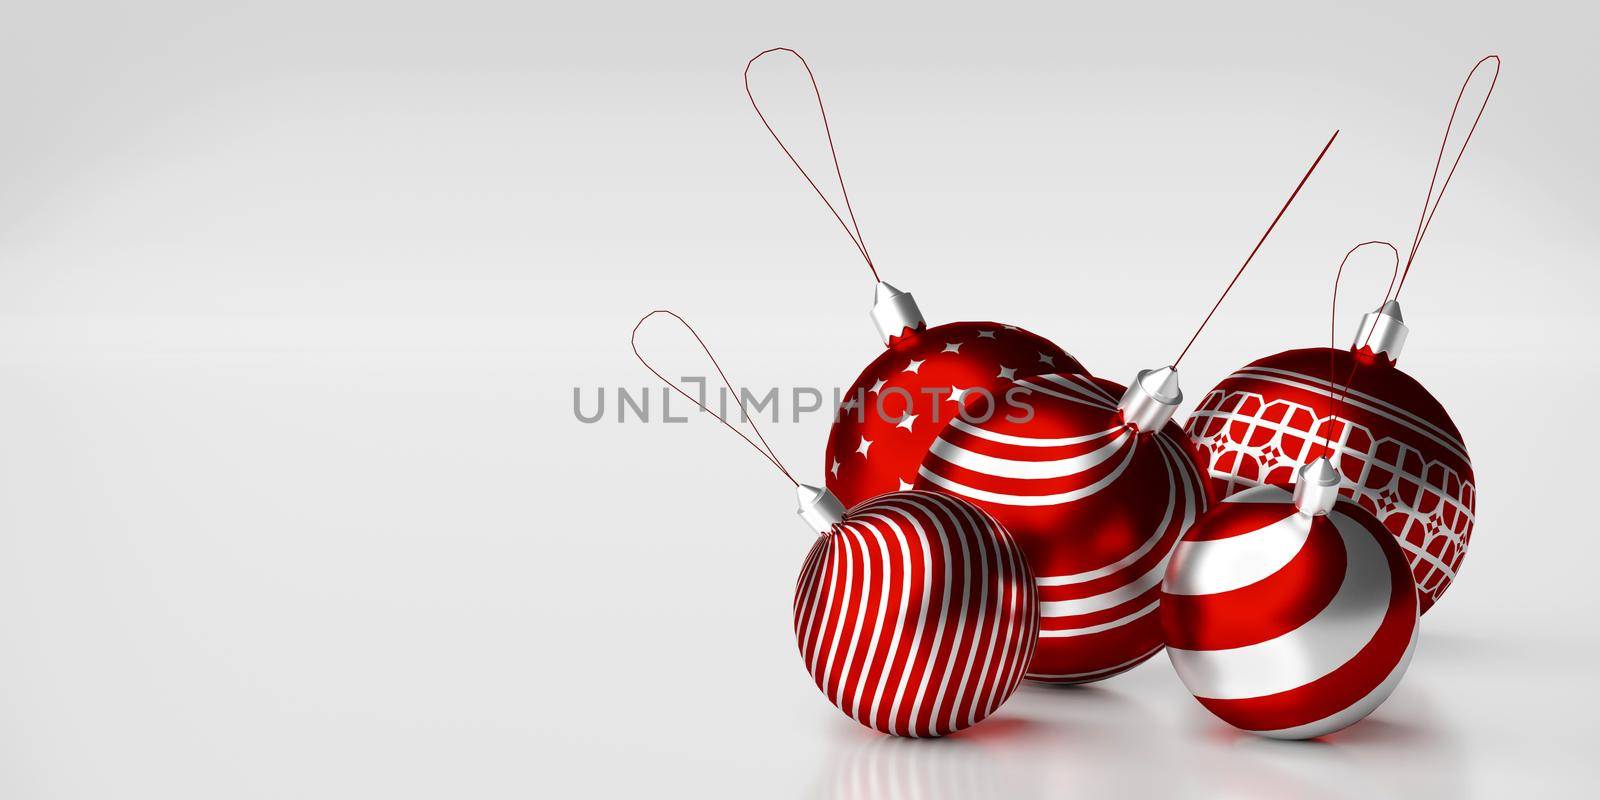 3d illustration of Christmas banner of Christmas ball on white background by nutzchotwarut